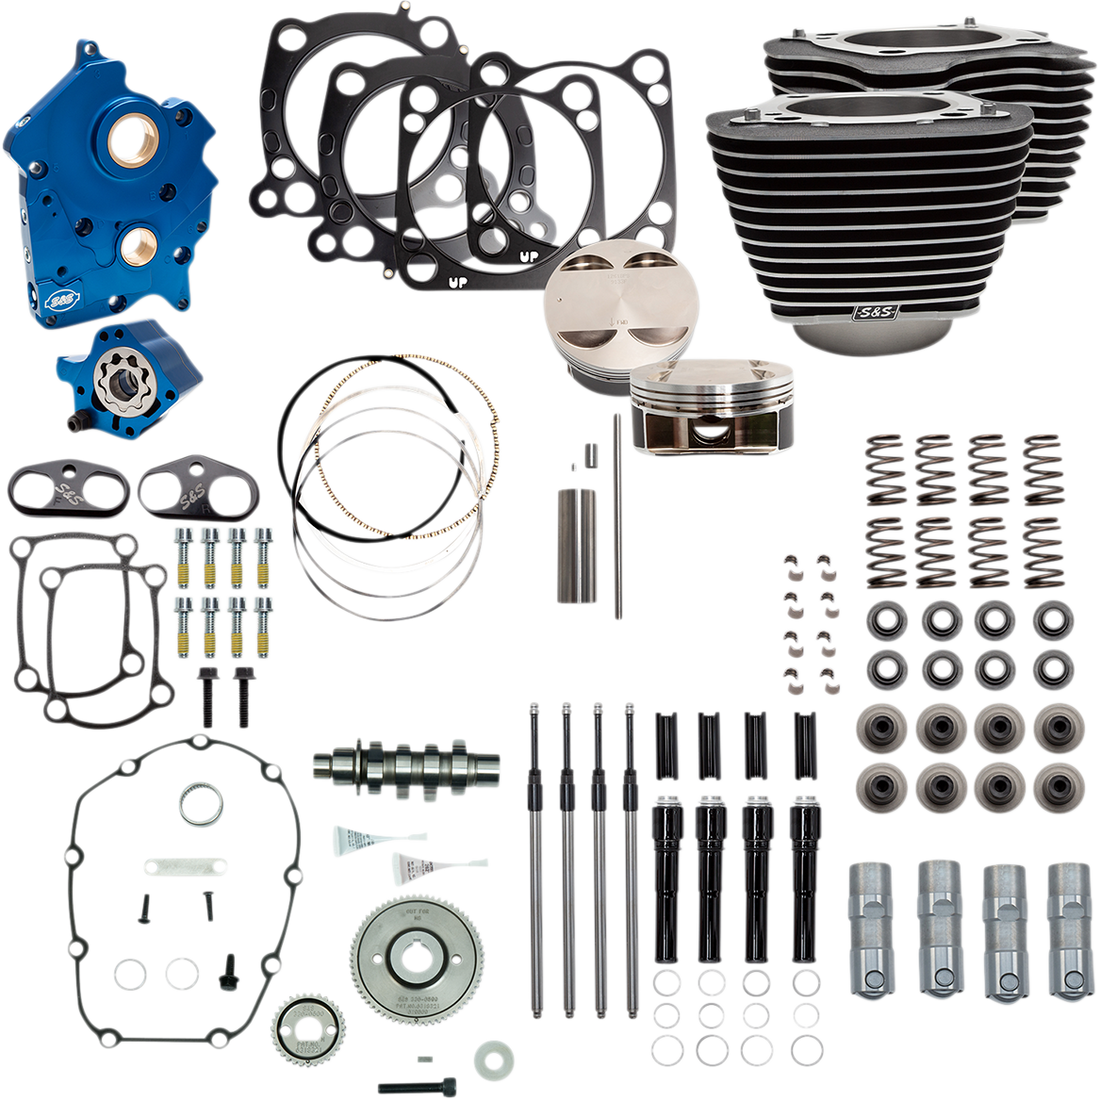 0904-0063 - S&S CYCLE Power Package - Gear Drive - Oil Cooled - Highlighted Fins - M8 310-1058A